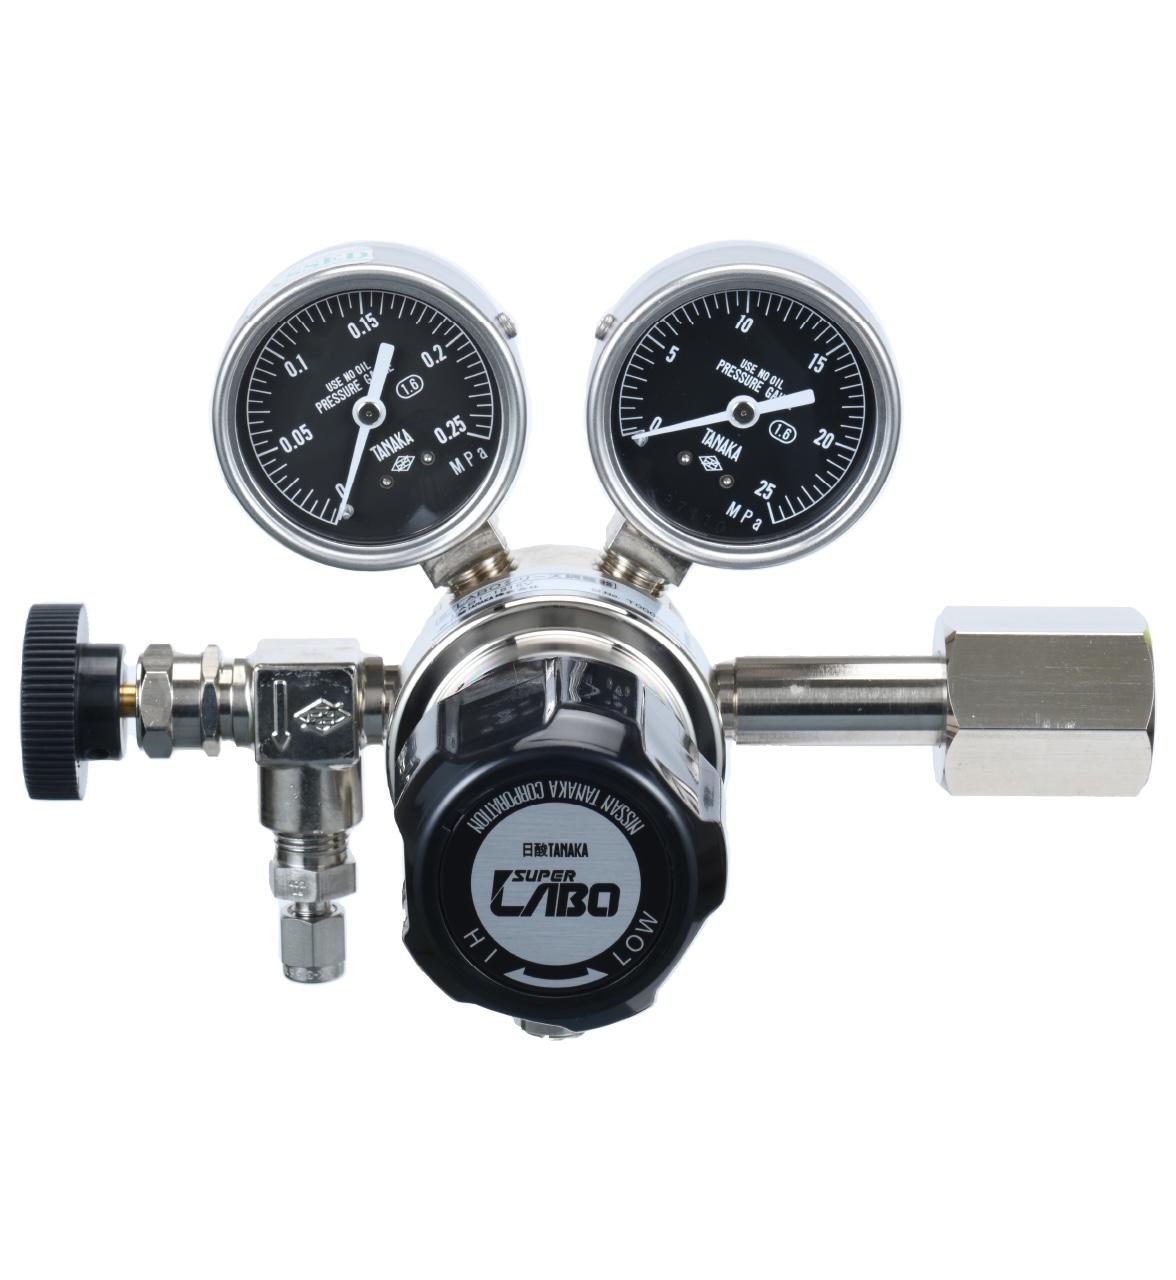 A close-up of a gas regulator

Description automatically generated with medium confidence